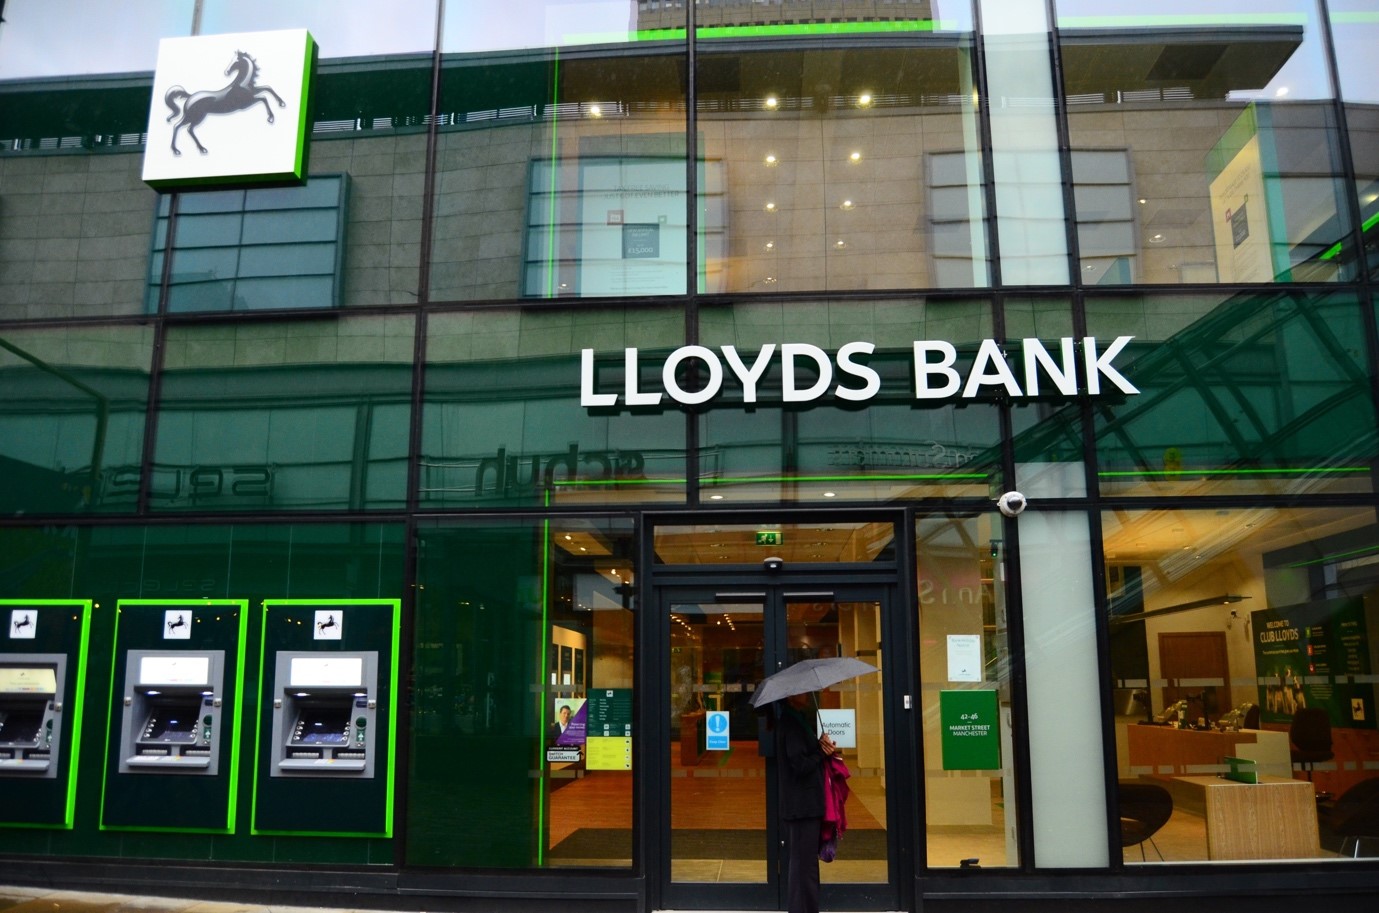 The front of a Lloyds bank branch. A person stands outside the doors under an umbrella.